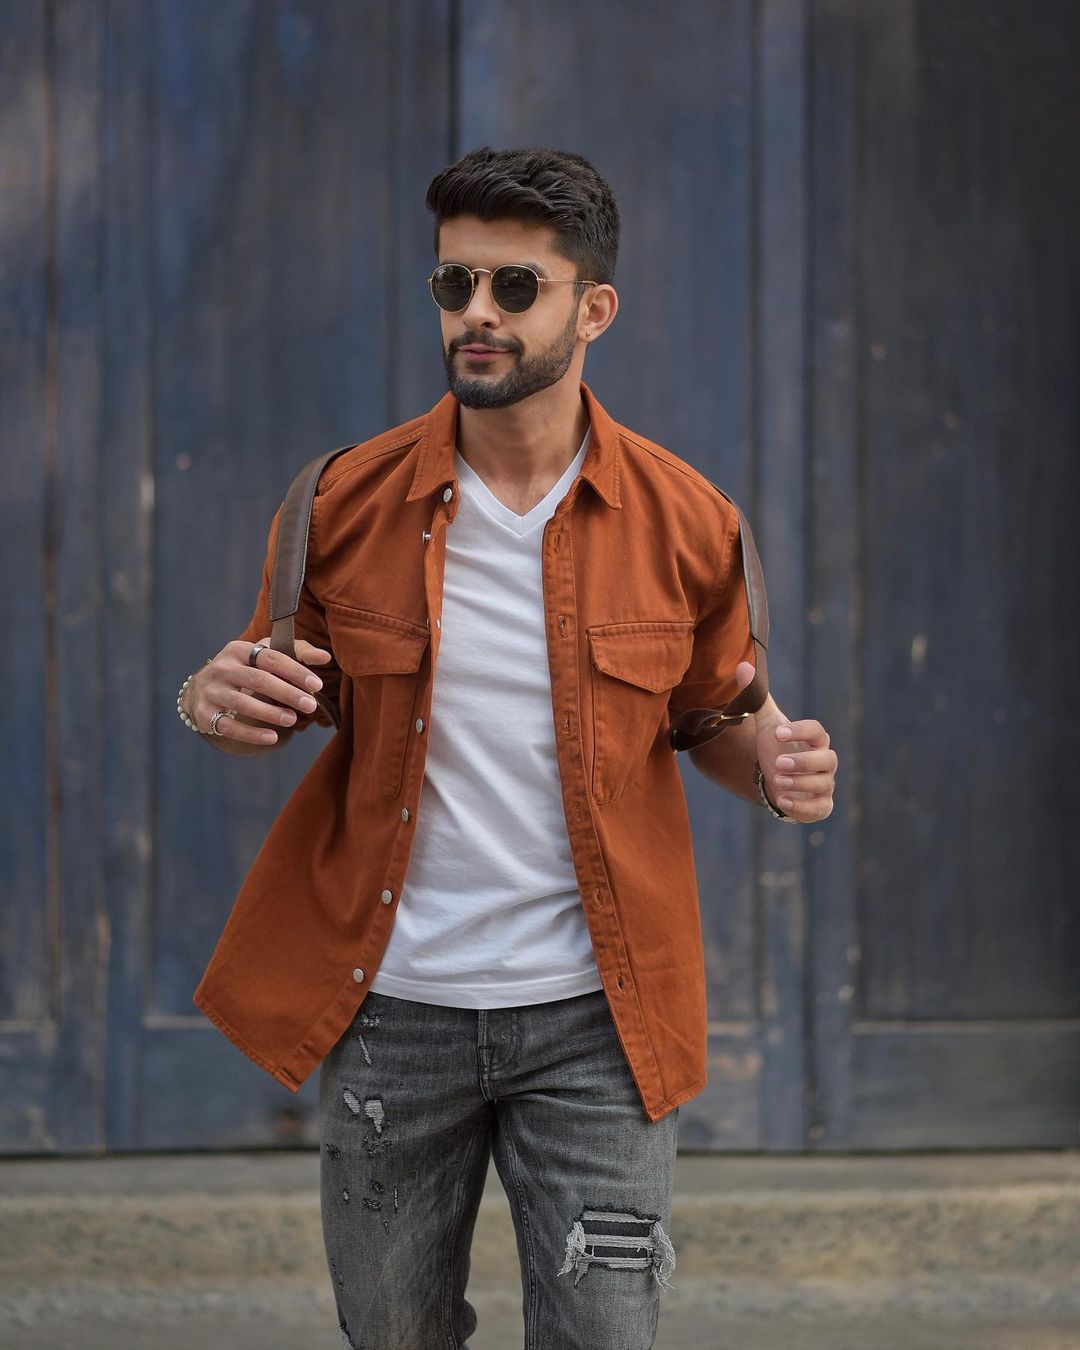 30 Best Indian Mens Hairstyles For Short Hair In 2021